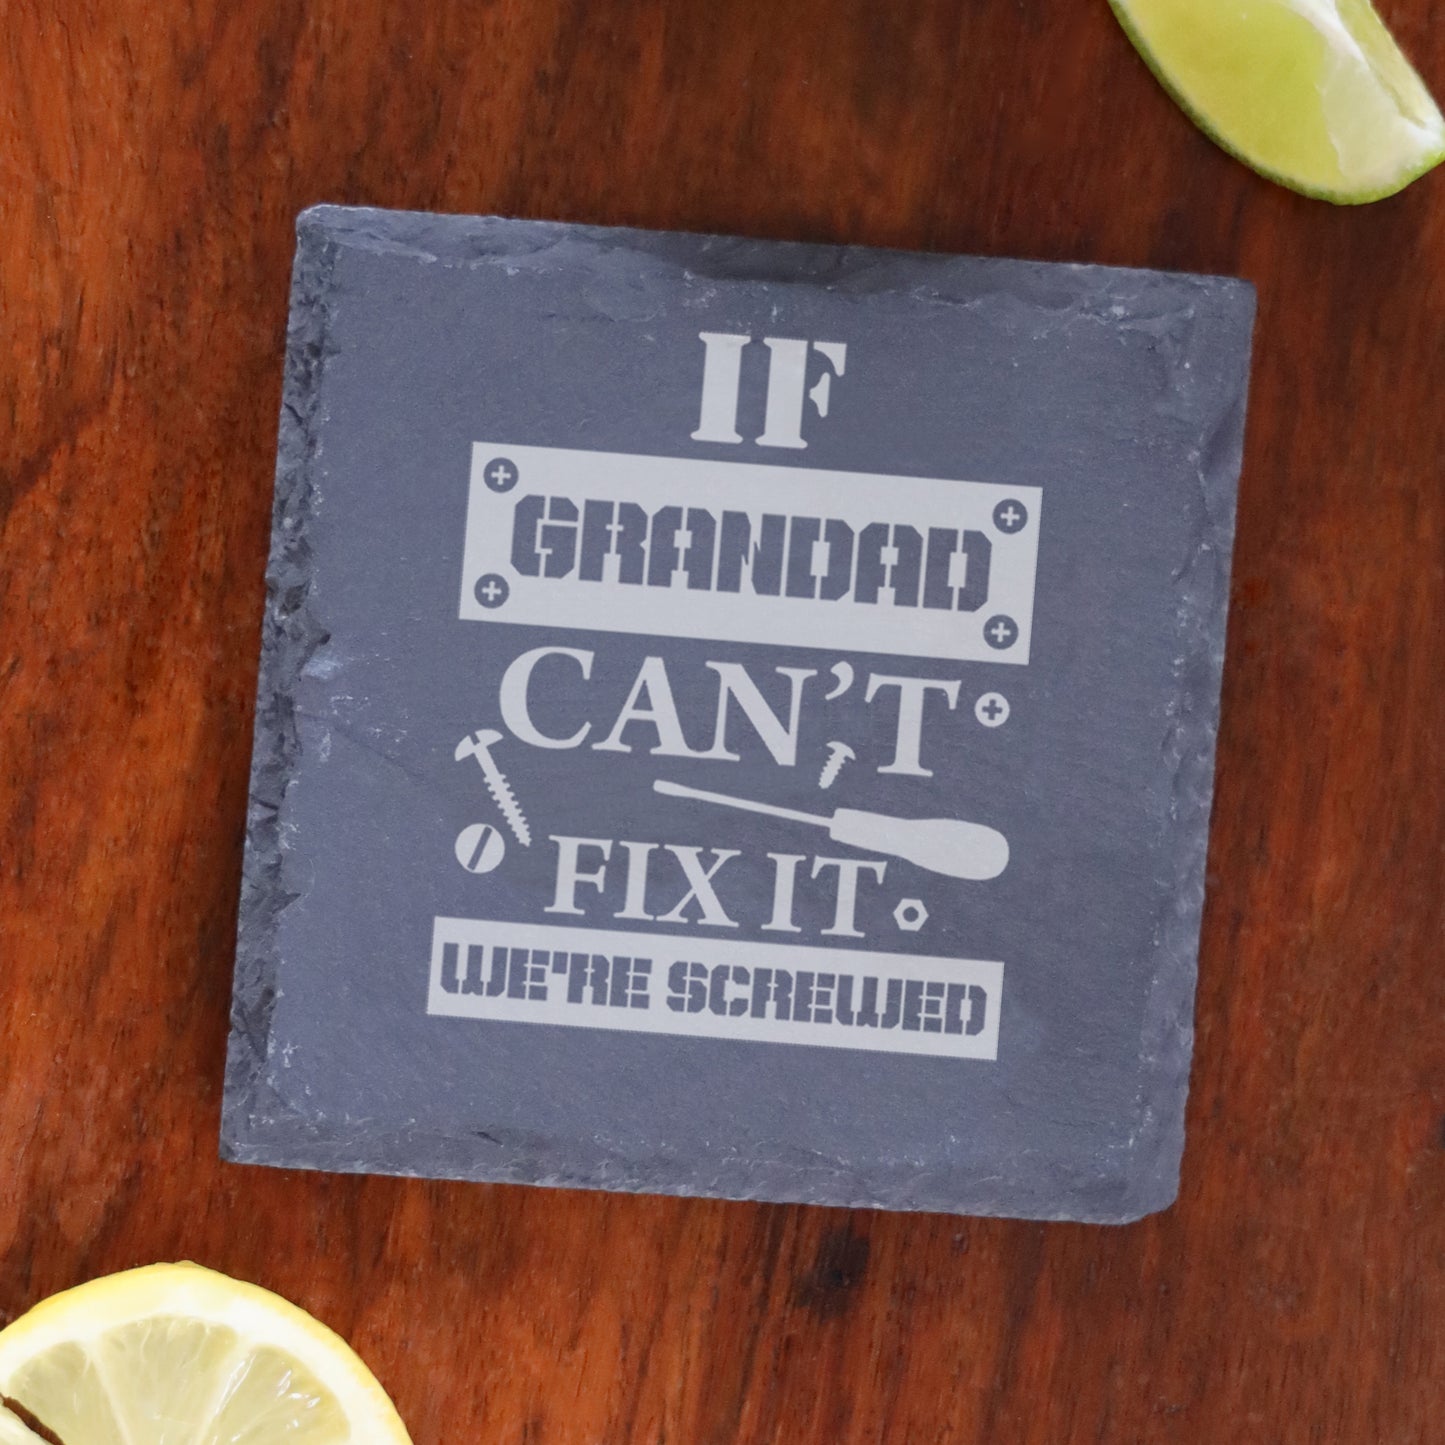 Engraved "If Grandad Can't Fix It We're Screwed " Novelty Wine Glass and/or Coaster Set  - Always Looking Good - Square Coaster Only  